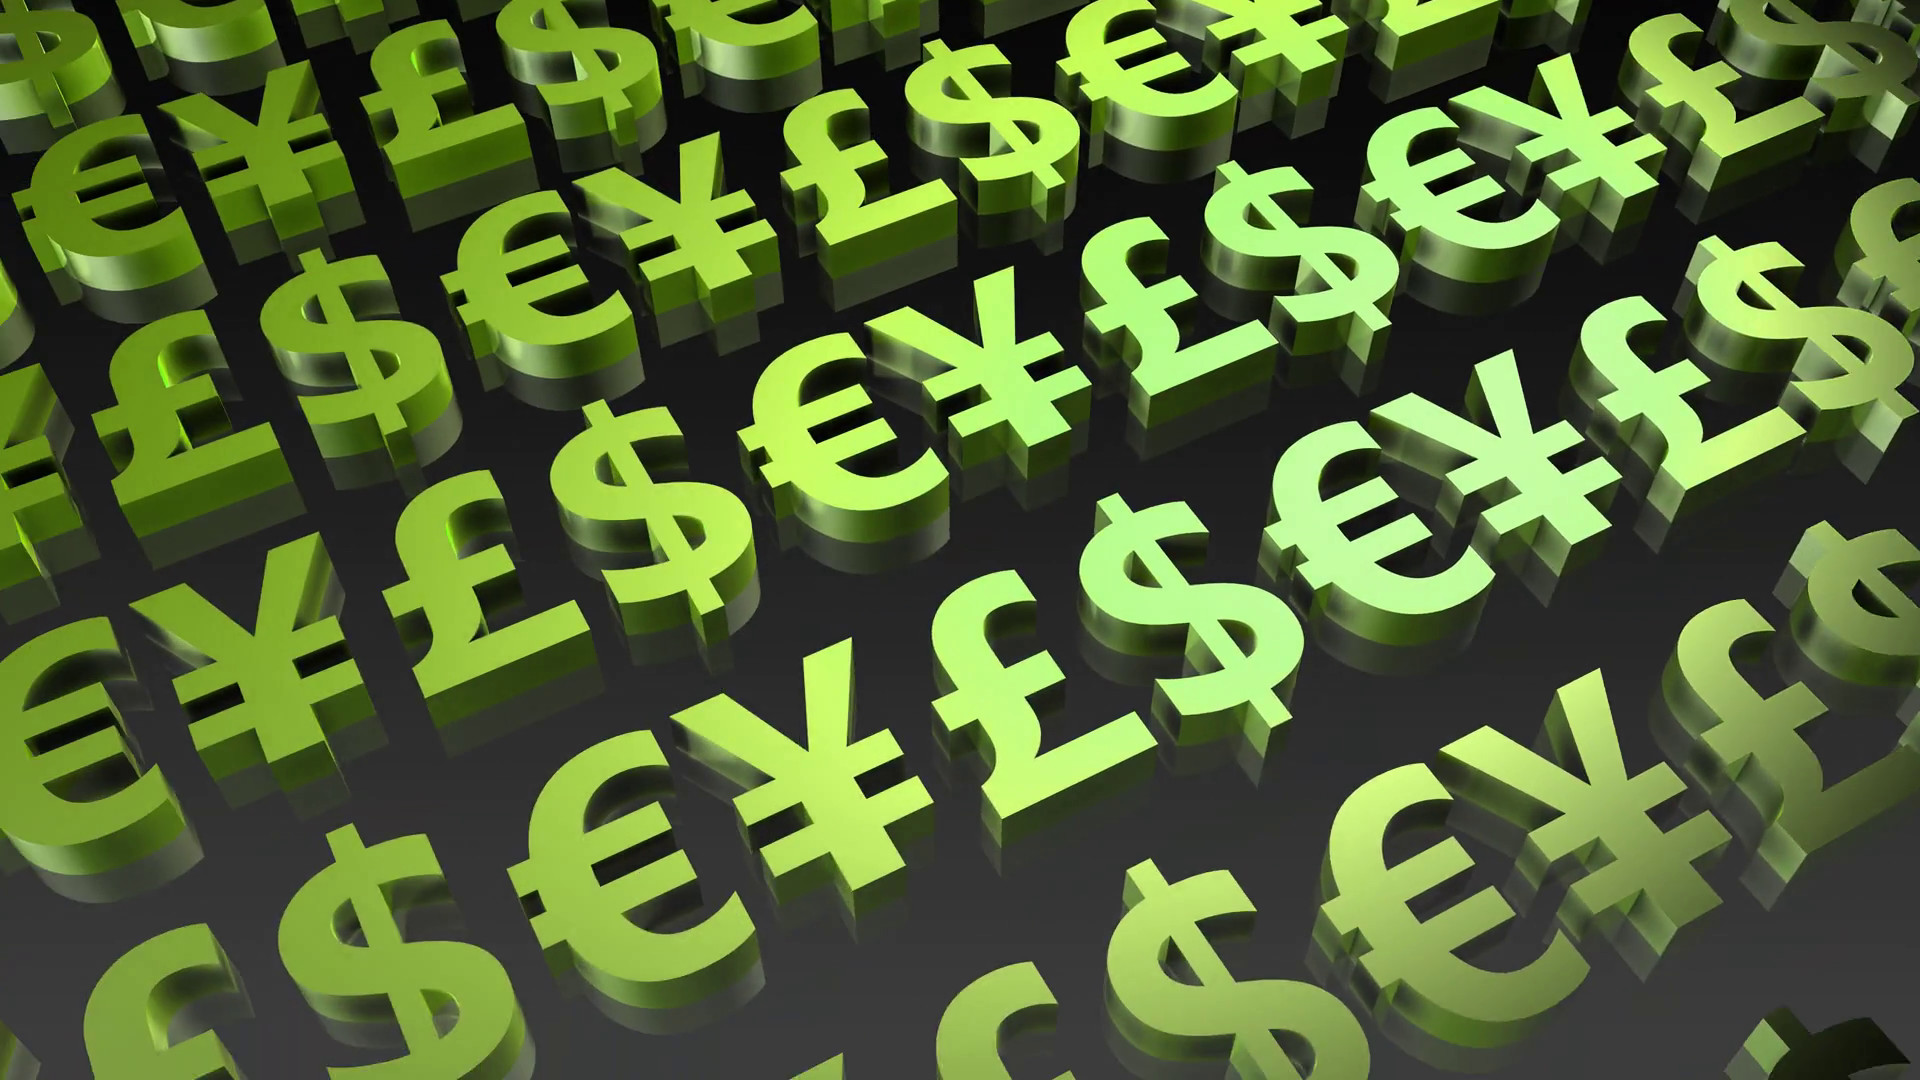 1920x1080 Global Currencies and Money Symbols in 3d Art Motion Background -  VideoBlocks